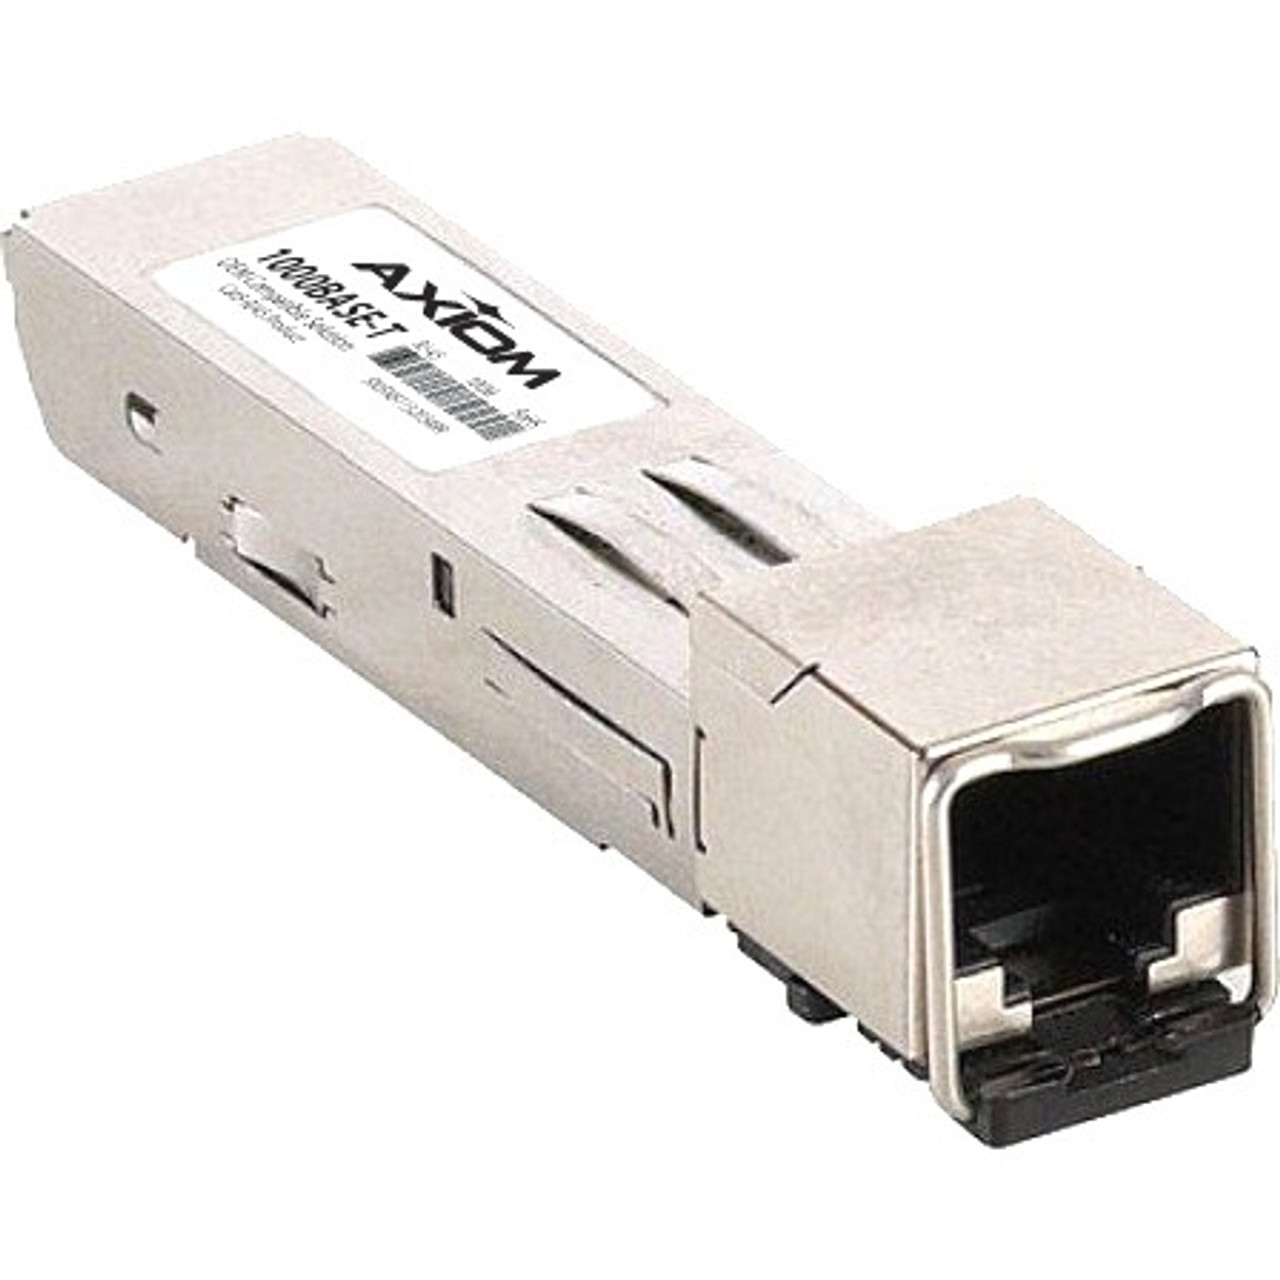 XBR-000190-AX Axiom 1Gbps 1000Base-T Copper 100m RJ-45 Connector SFP Transceiver Module for Brocade Compatible